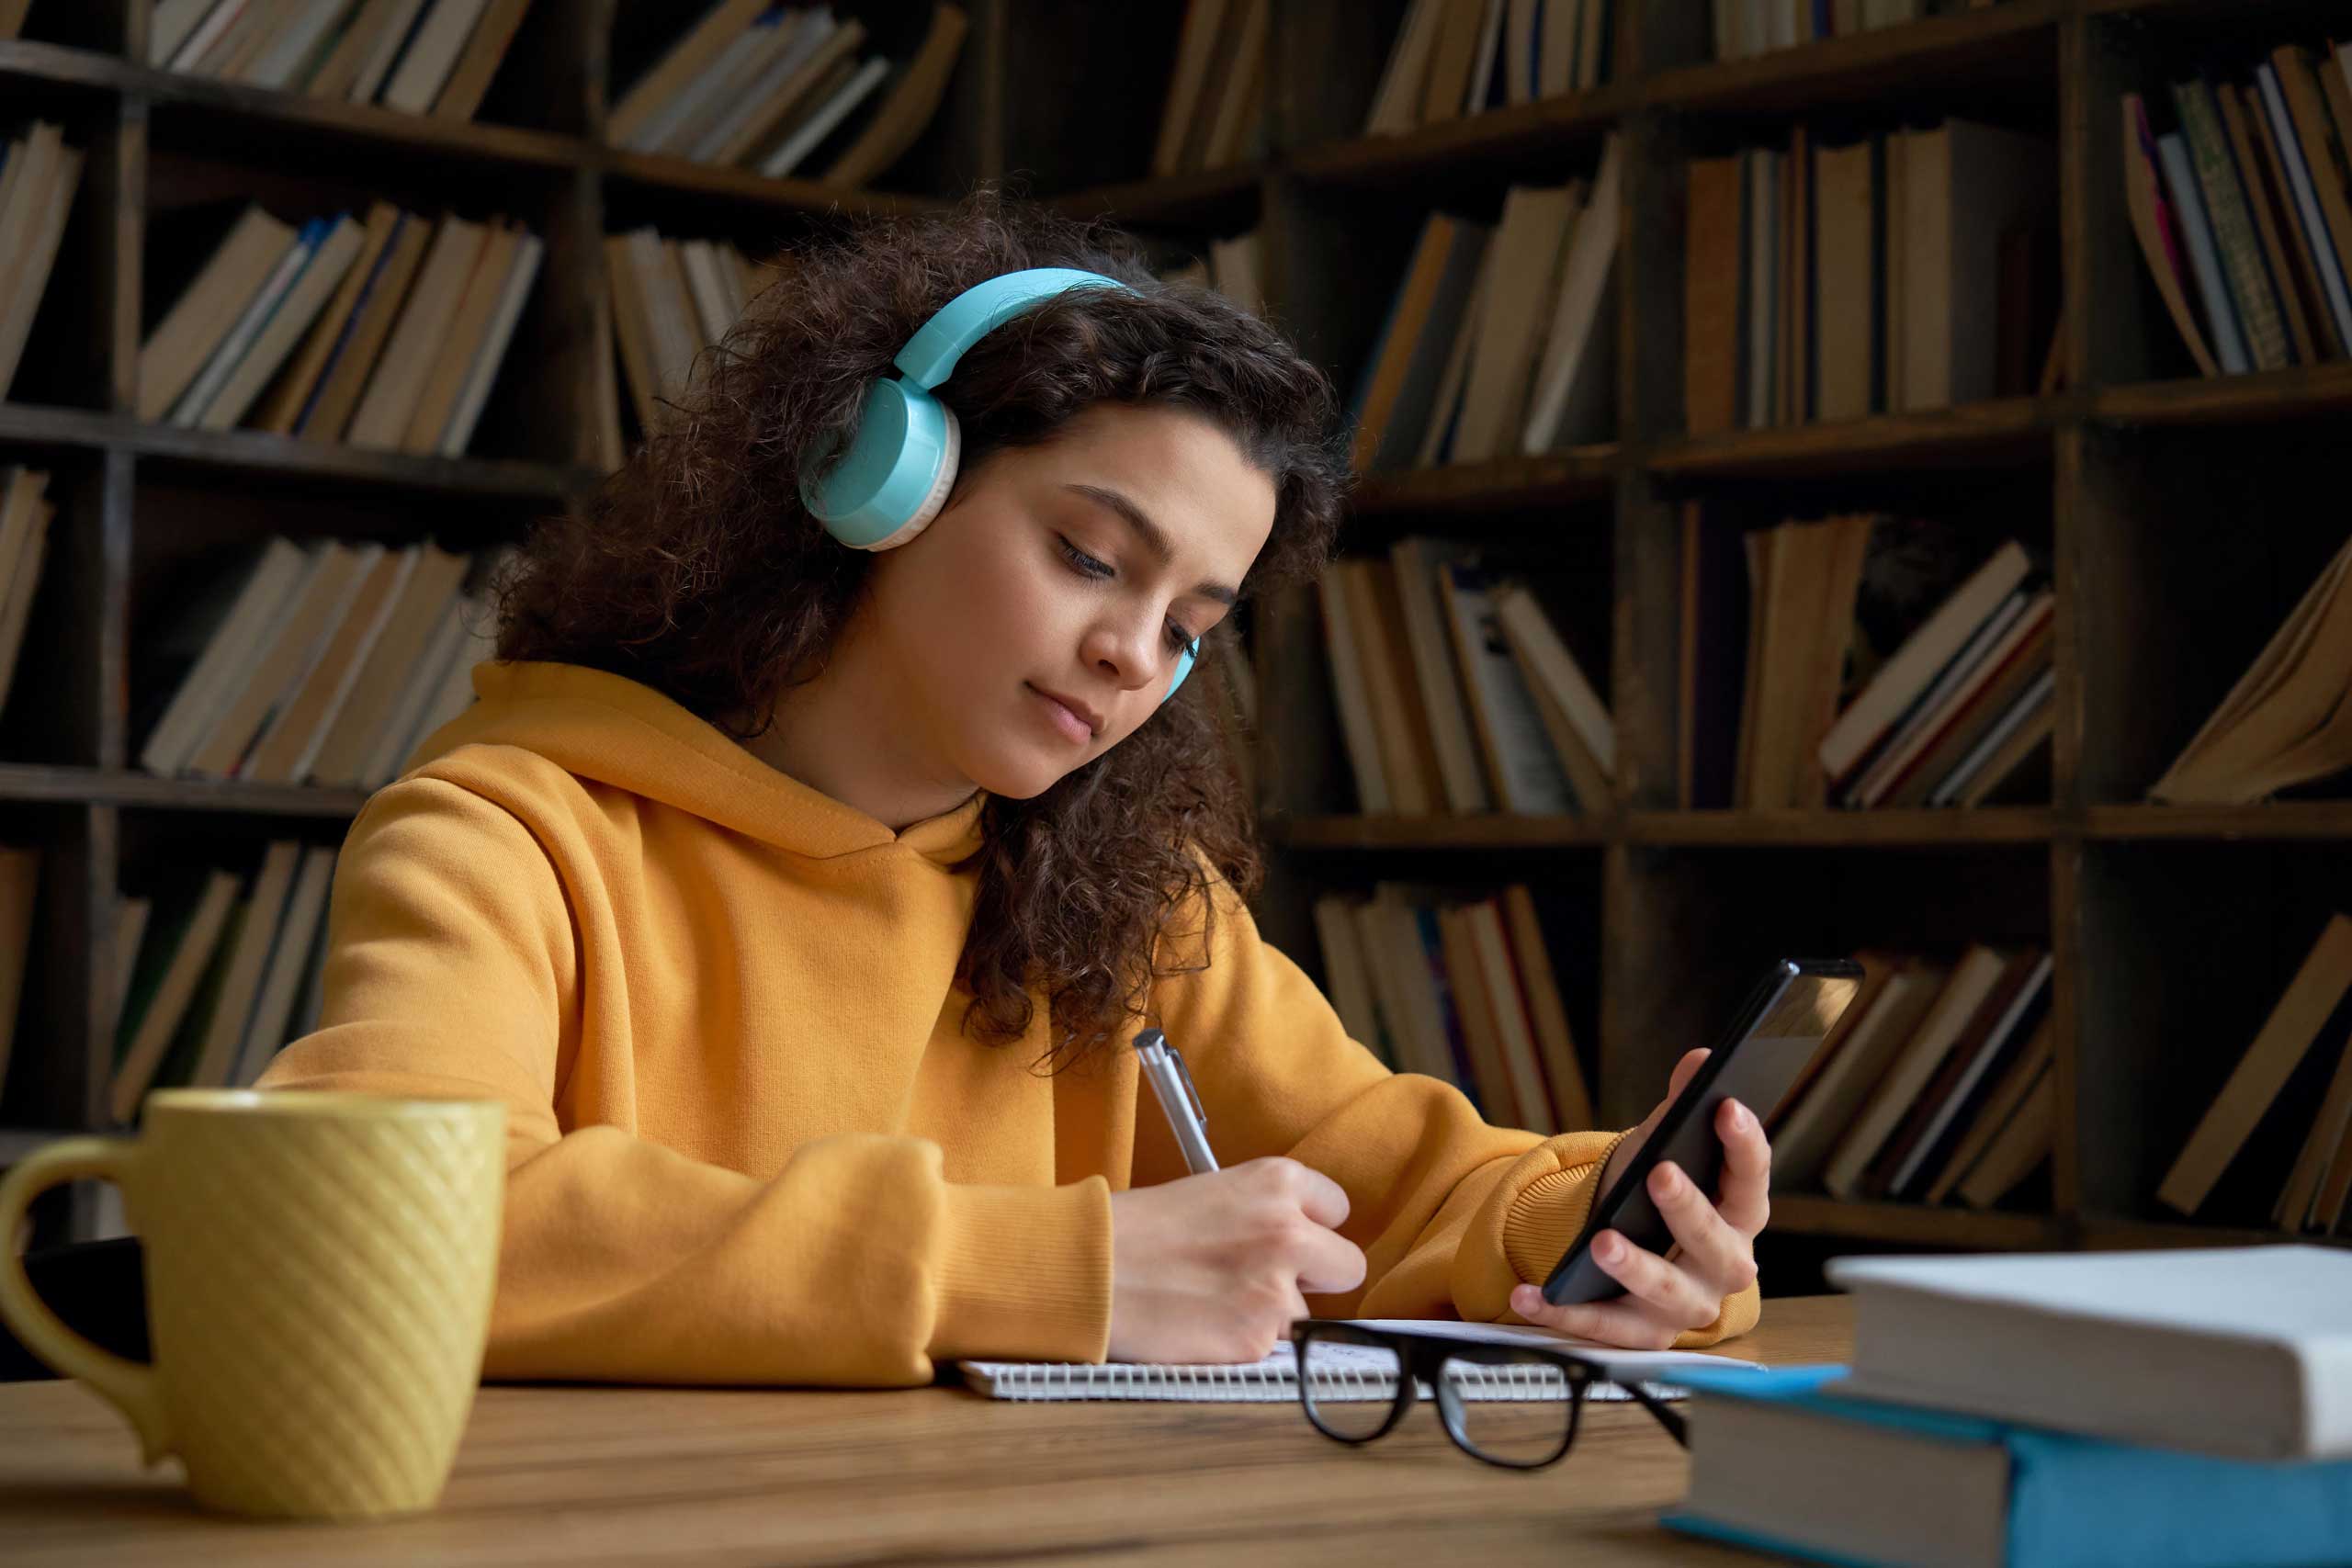 Young girl studyingin library with headphones on